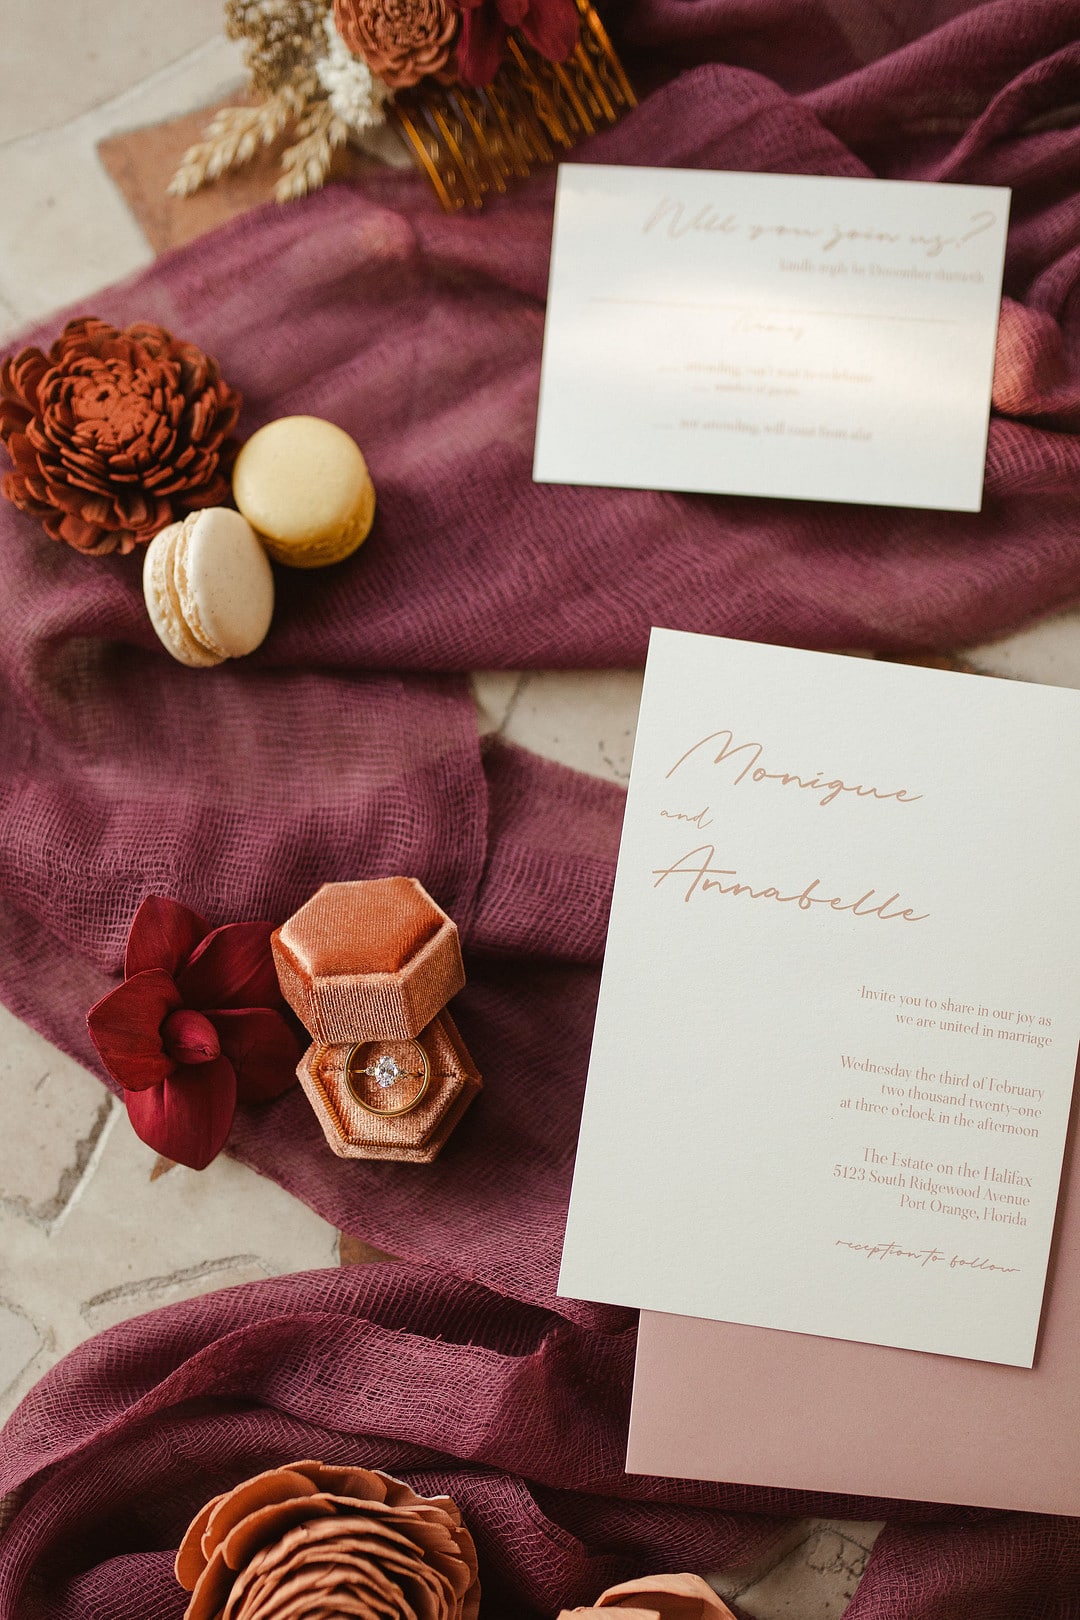 a close up photo of the invitation on a burgundy cloth with wooden flowers surrounding